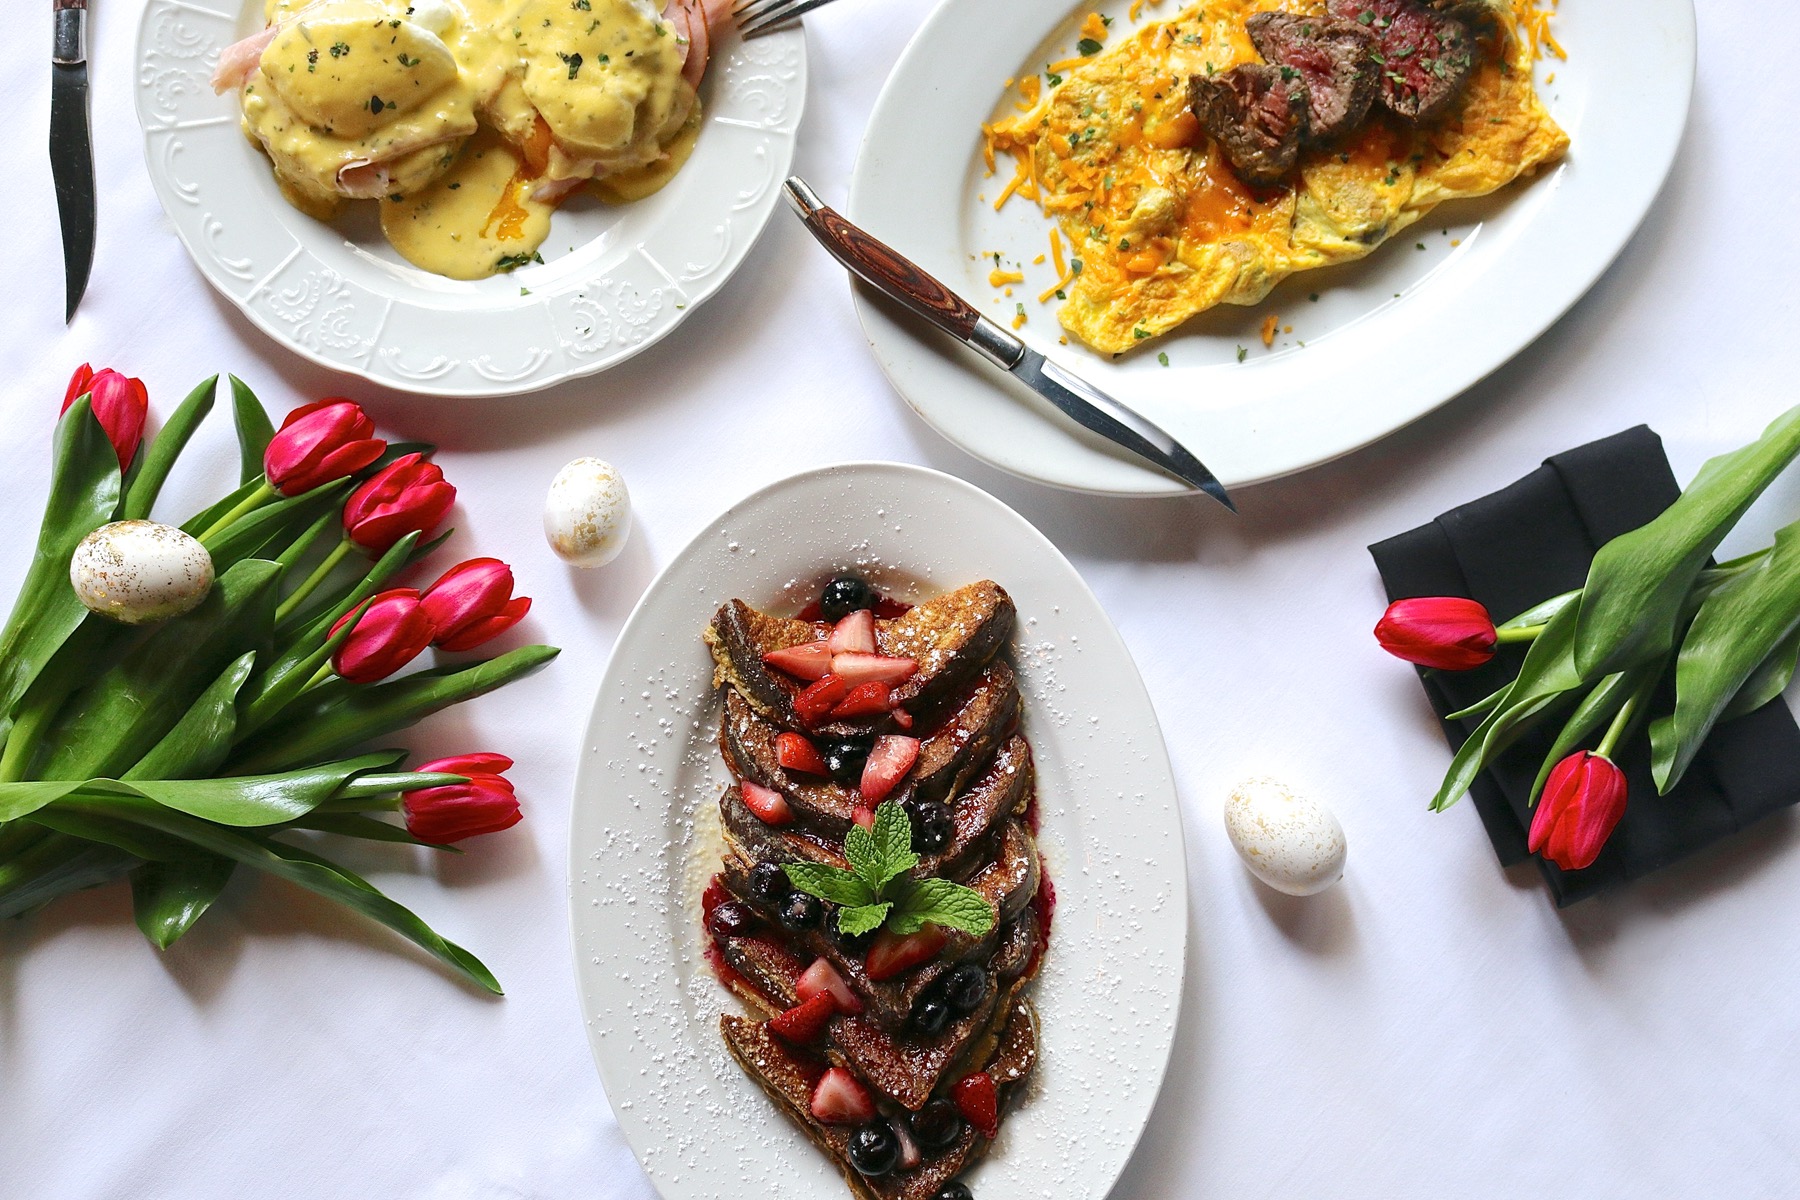 Where to get Easter brunch and Passover specials in Chicago